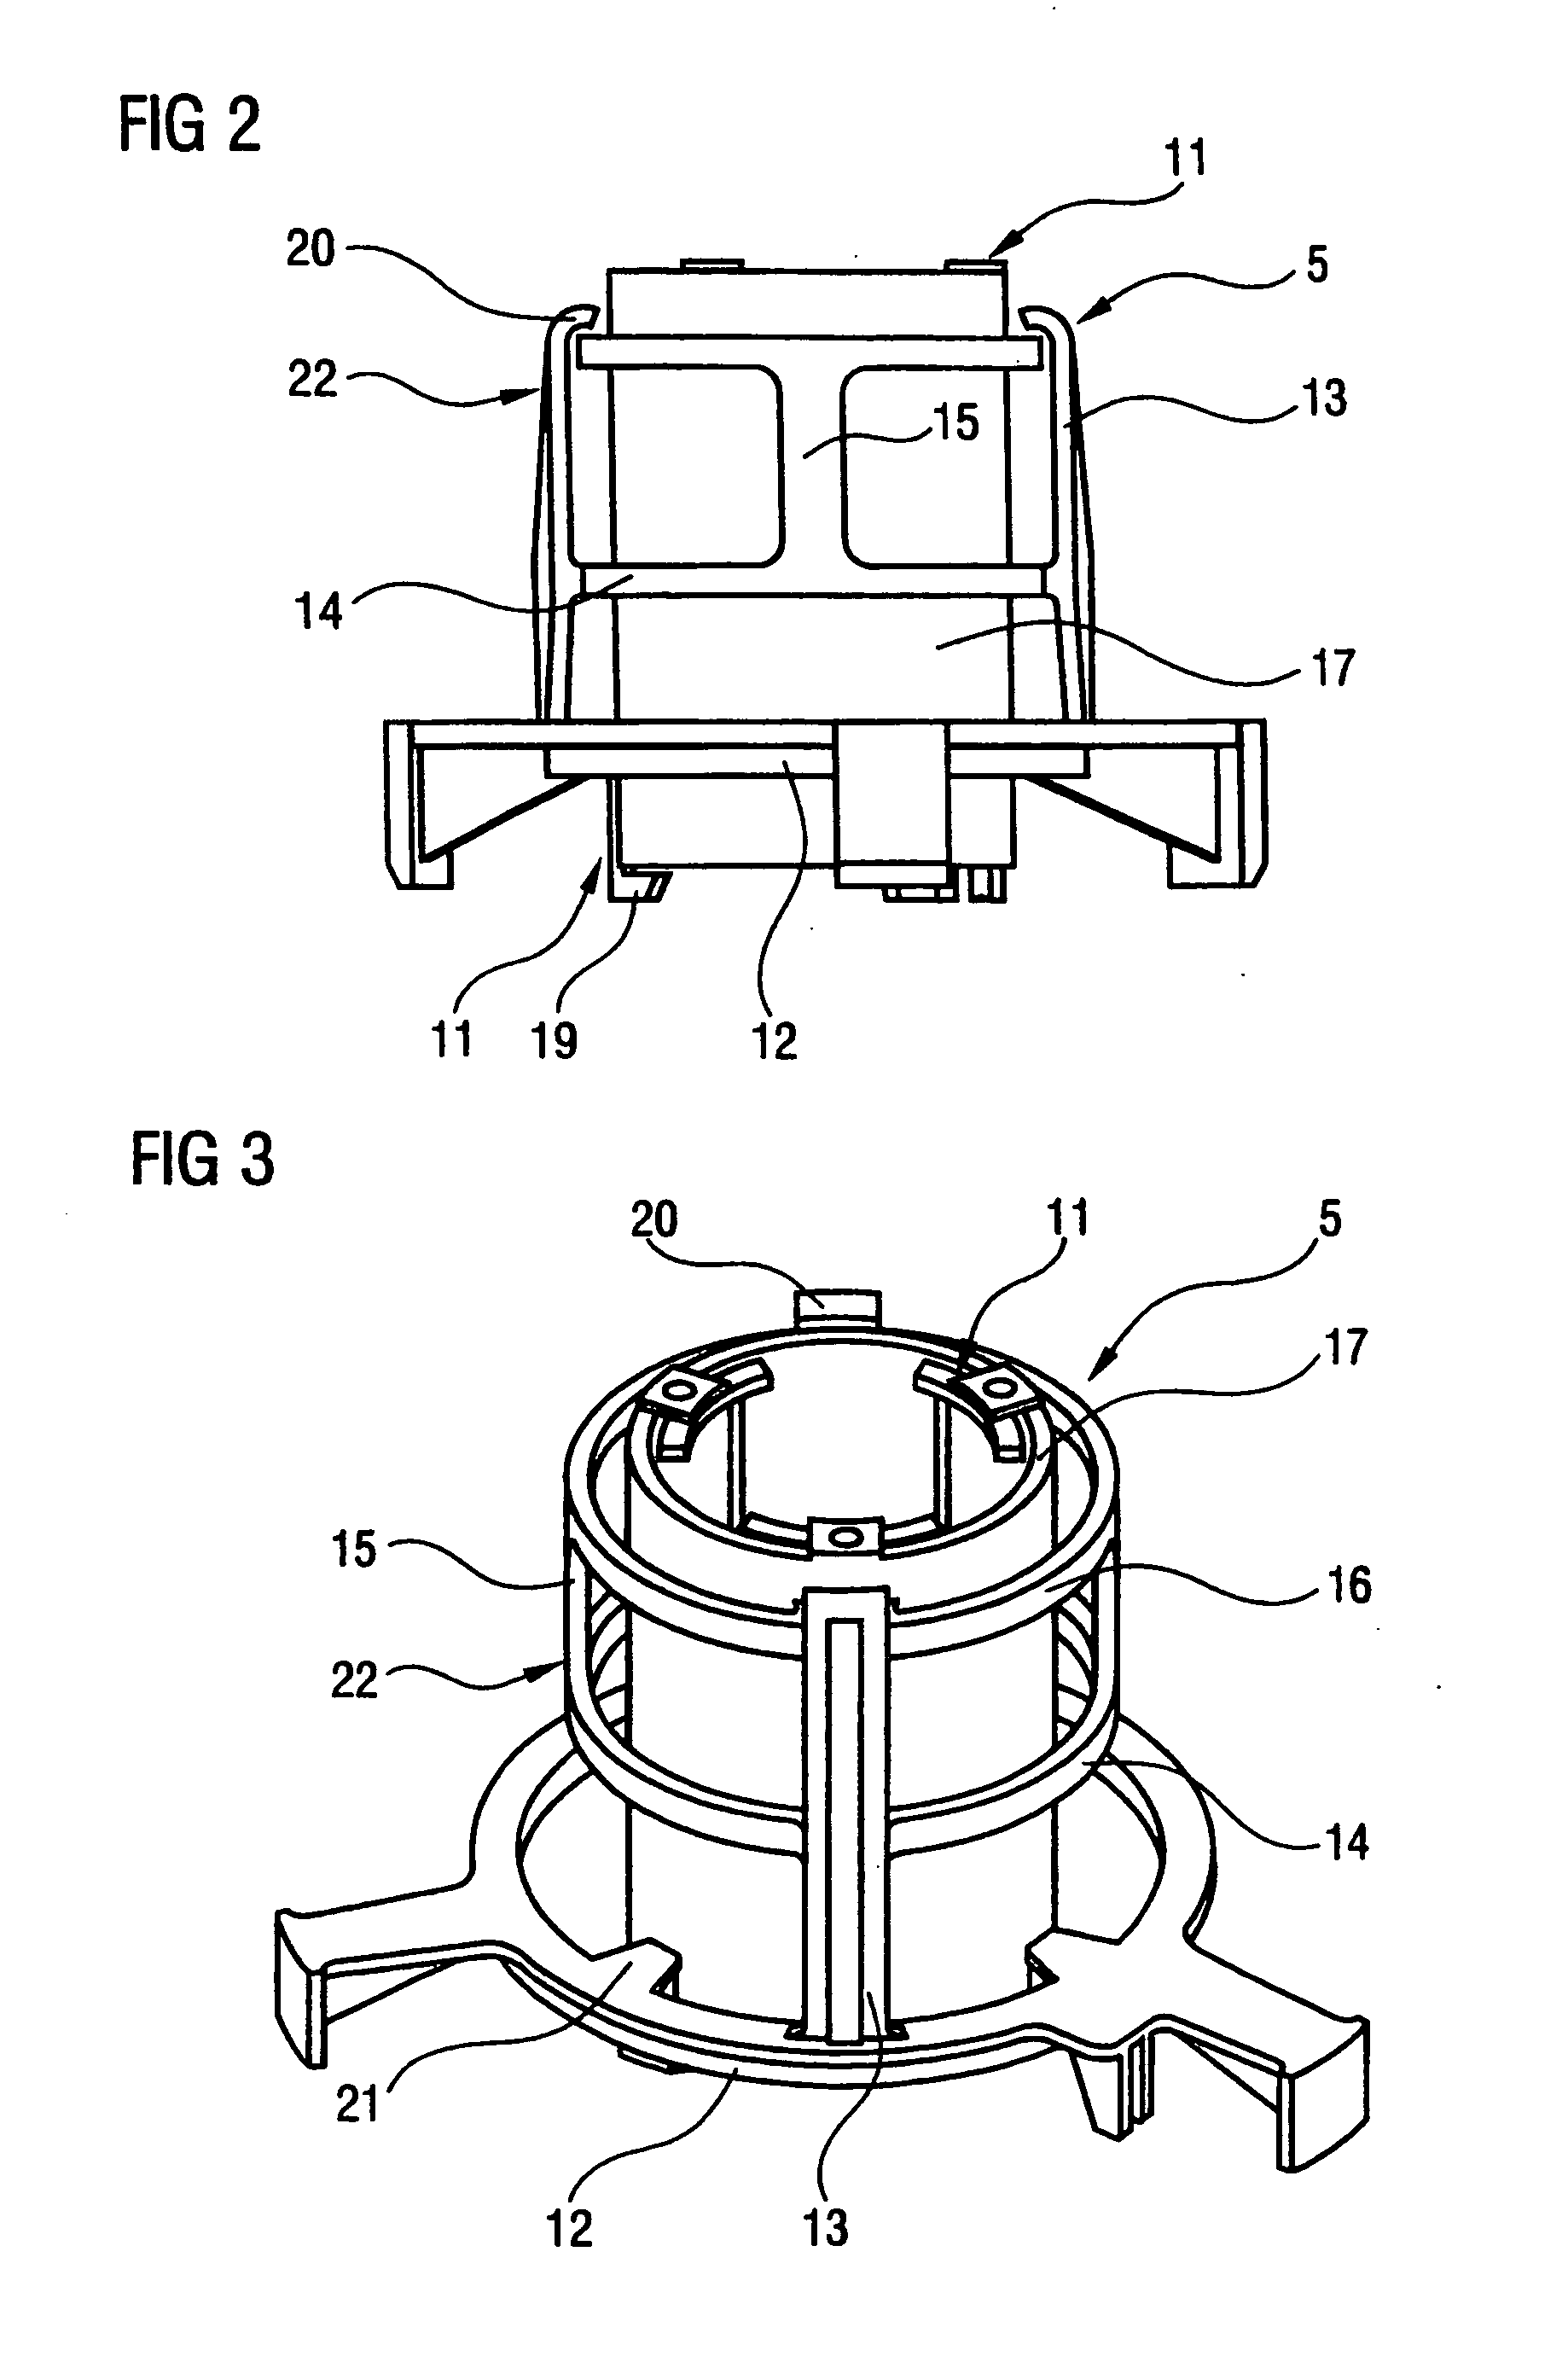 Device for retaining a fuel pump in a fuel container